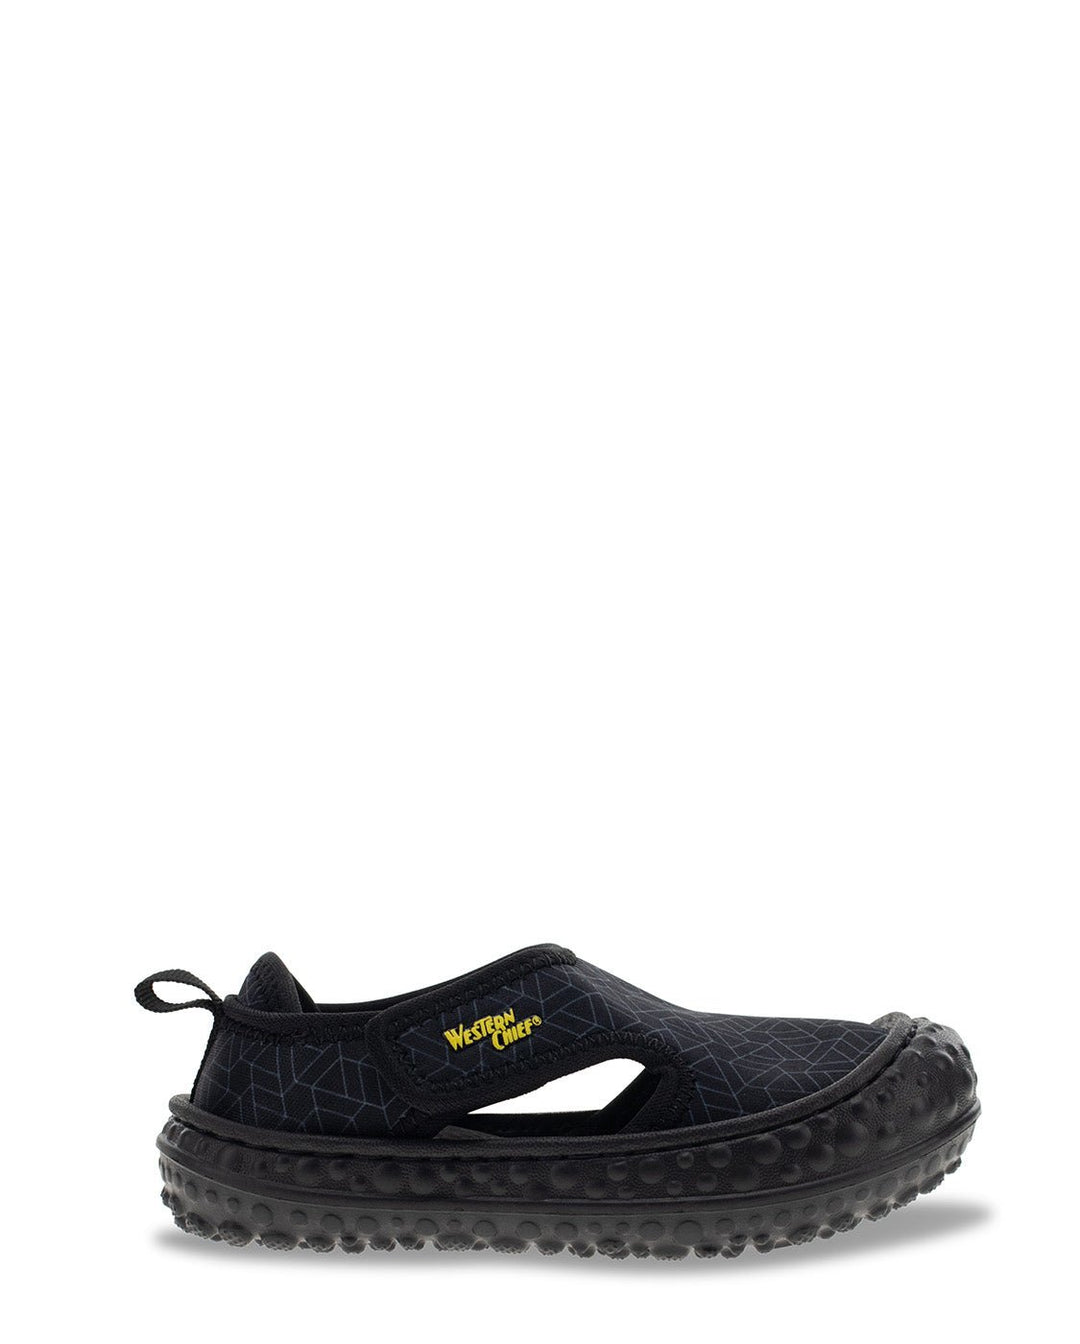 New! Kids Discover Sandal - Black - Western Chief